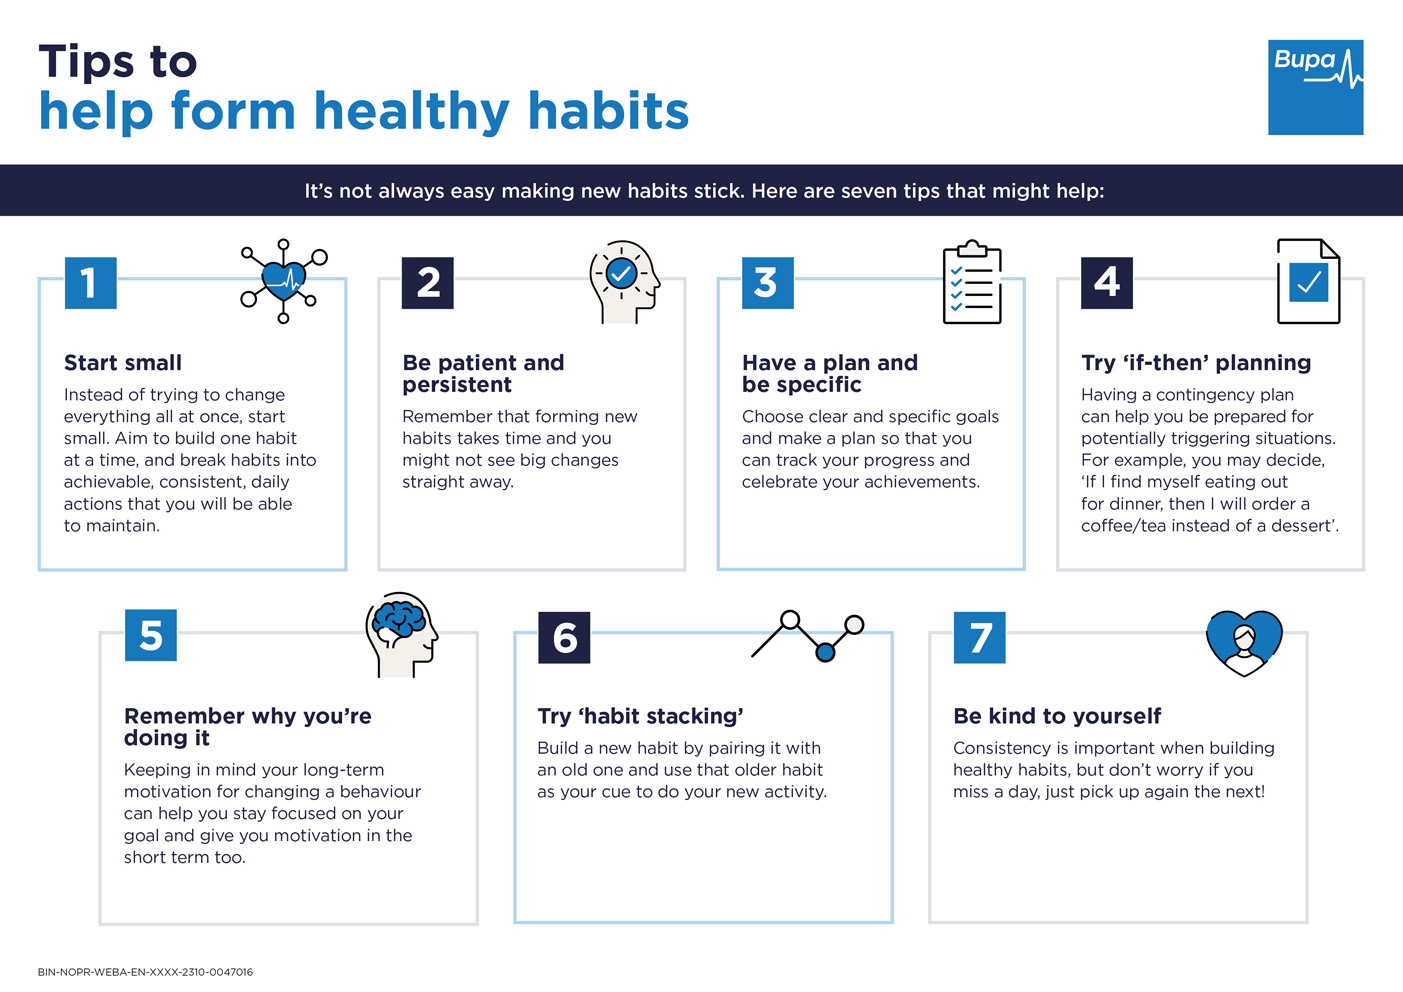 Tips to help form healthy habits